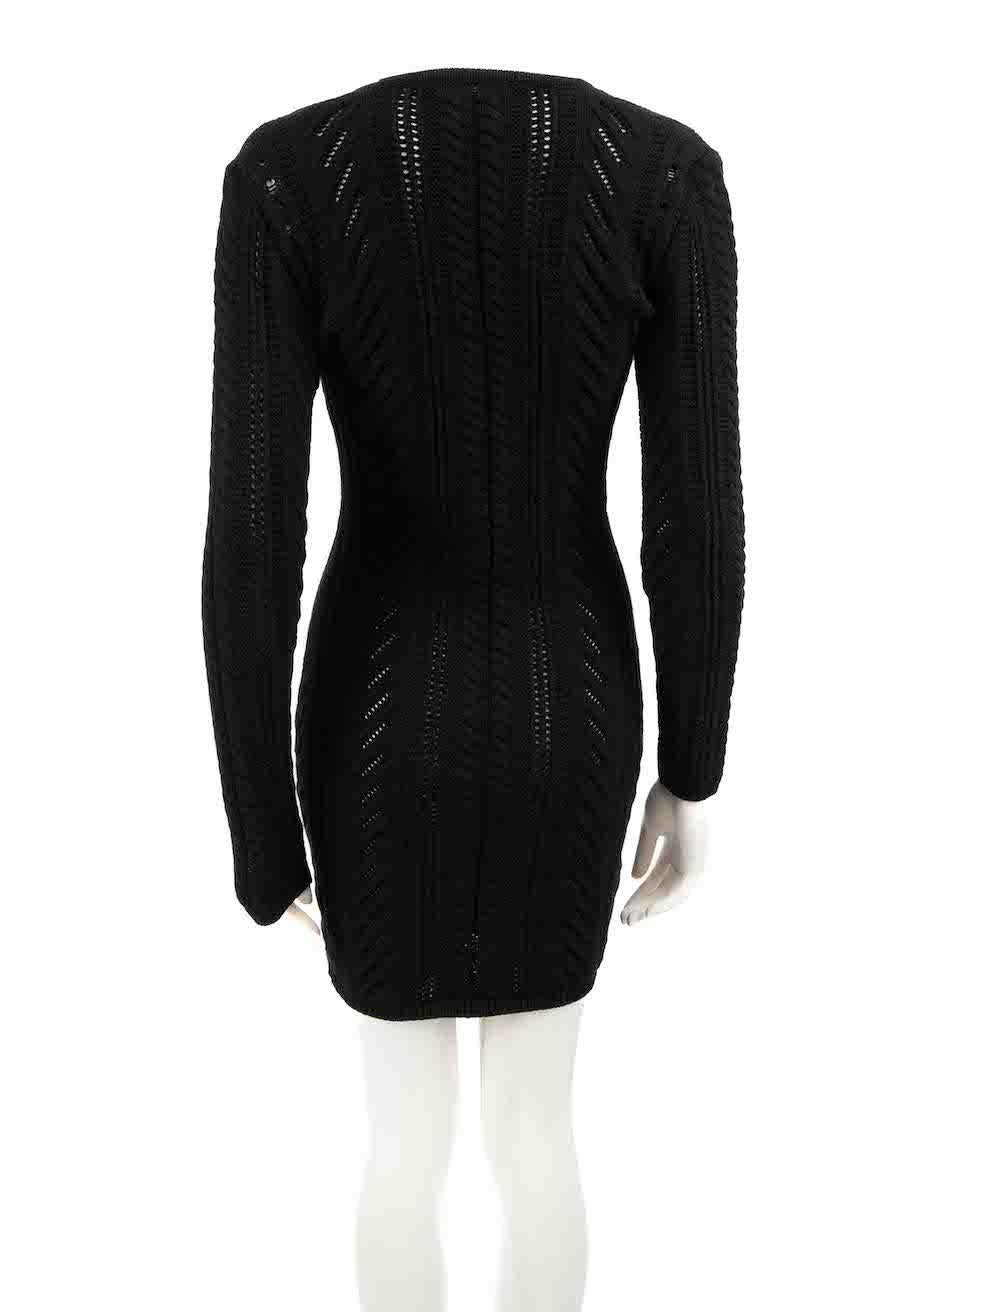 Dsquared2 Black Lace-Up Front Knit Mini Dress Size M In Good Condition For Sale In London, GB